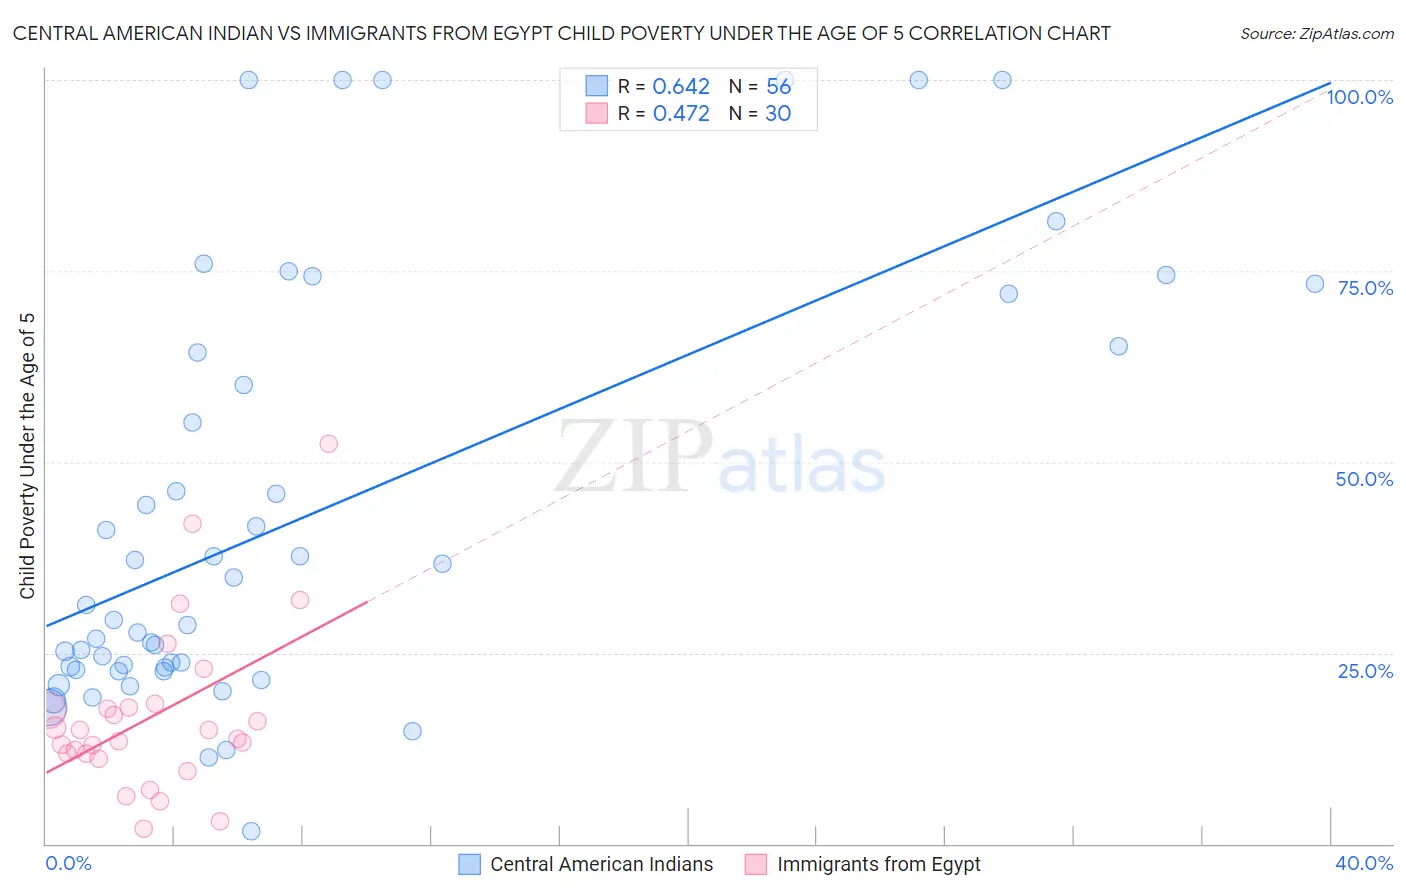 Central American Indian vs Immigrants from Egypt Child Poverty Under the Age of 5